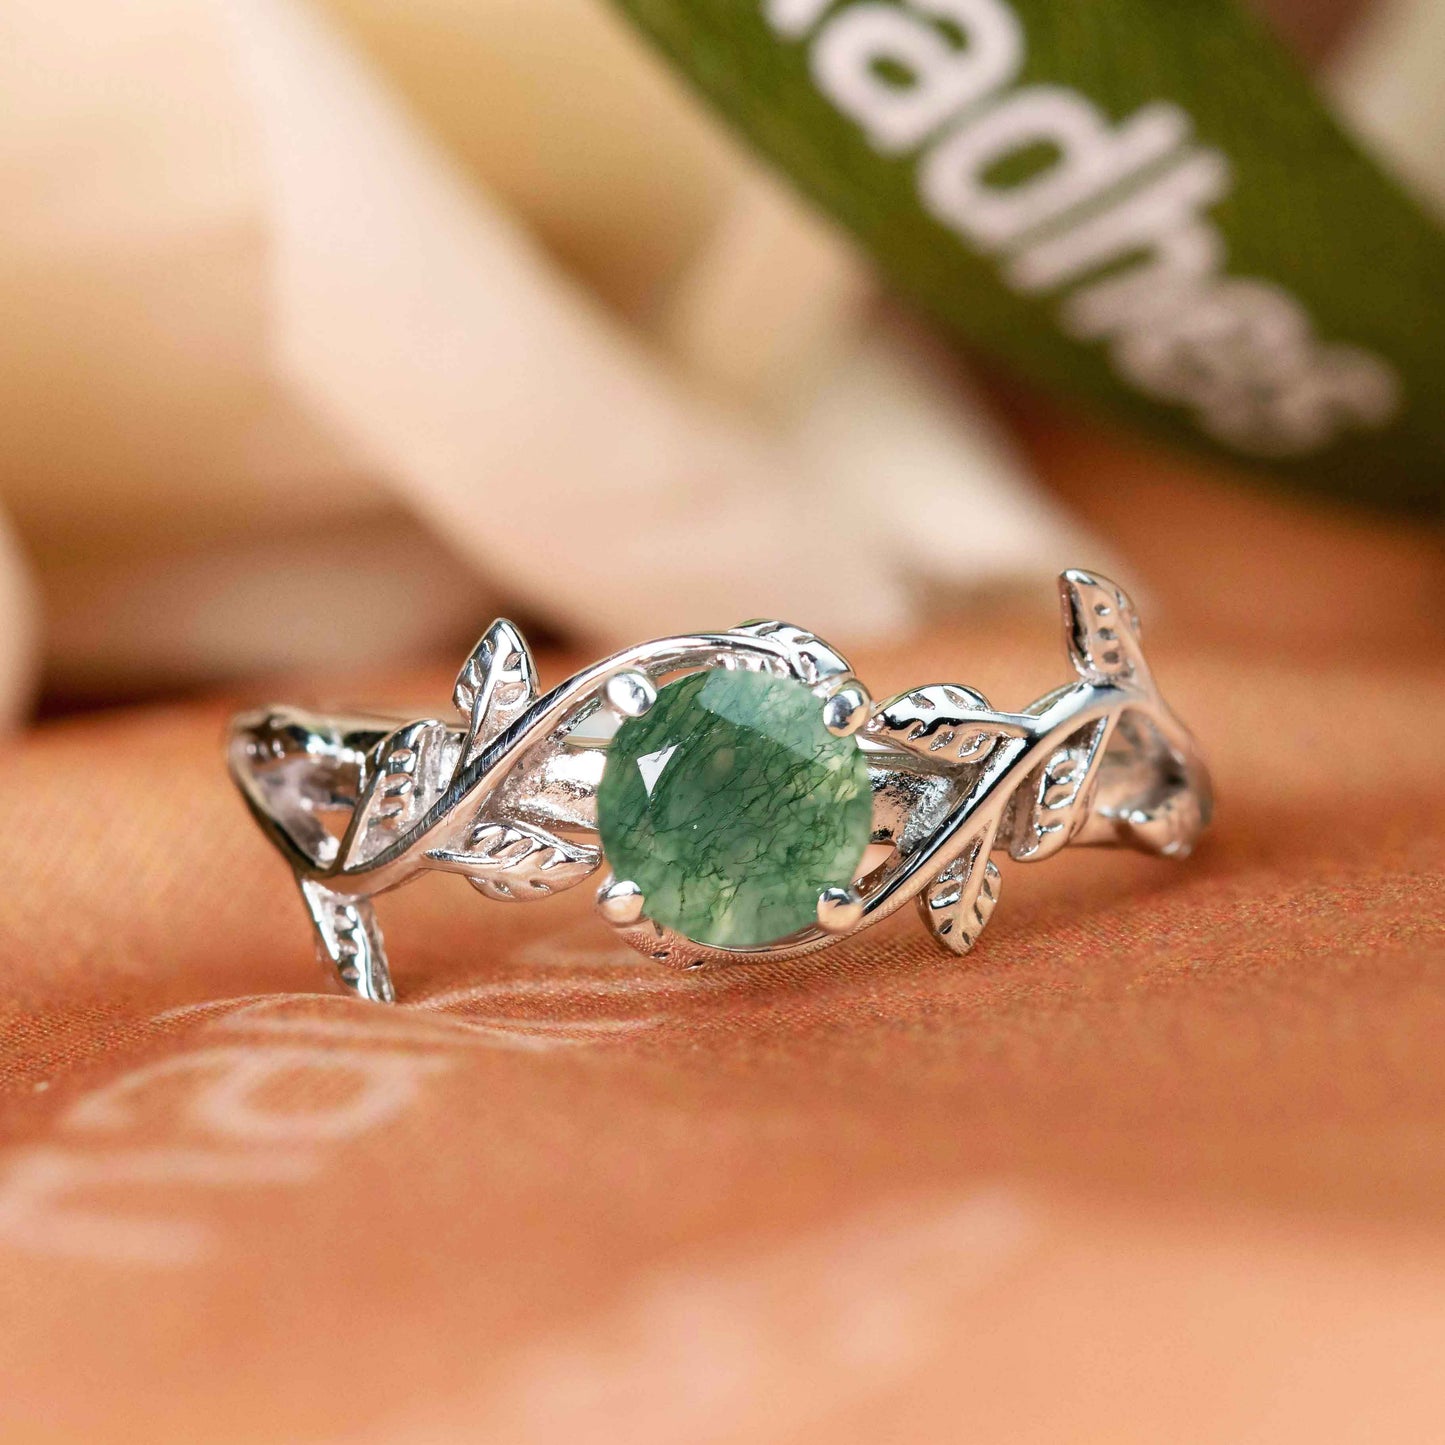 Dainty Vine 1 carat Round Shaped Moss Green Agate Solitaire Ring in White Gold